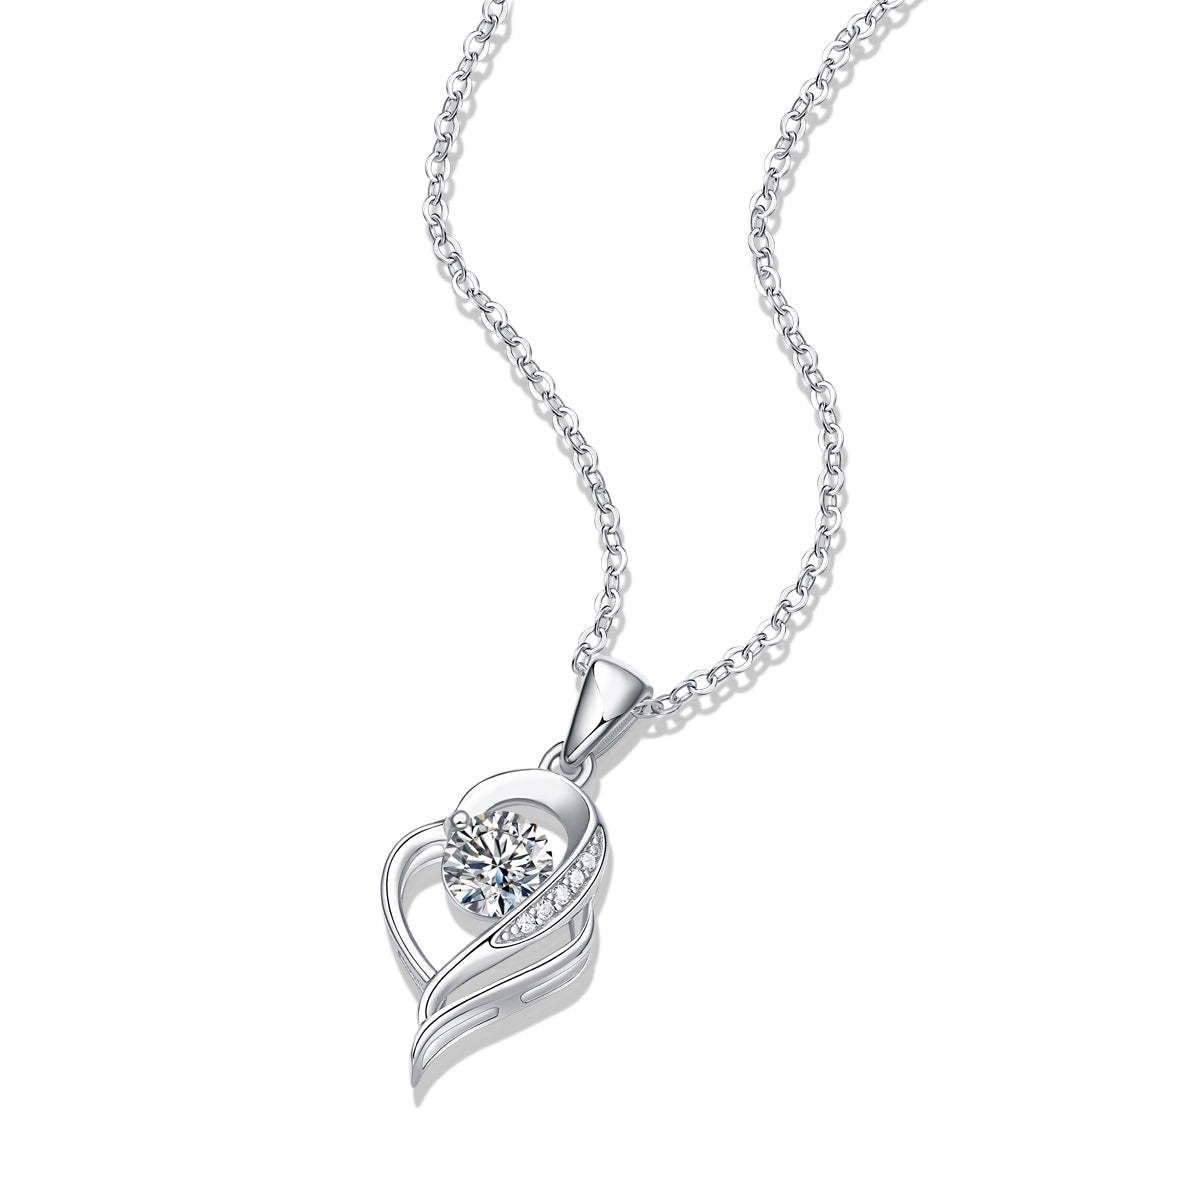 FairyLocus “Heartstrings” 0.5ct Moissanite Necklace Sterling Silver 18K White Gold Plated D Color VVS1 Clarity Brilliant Necklace FLZZNLMS28 FairyLocus